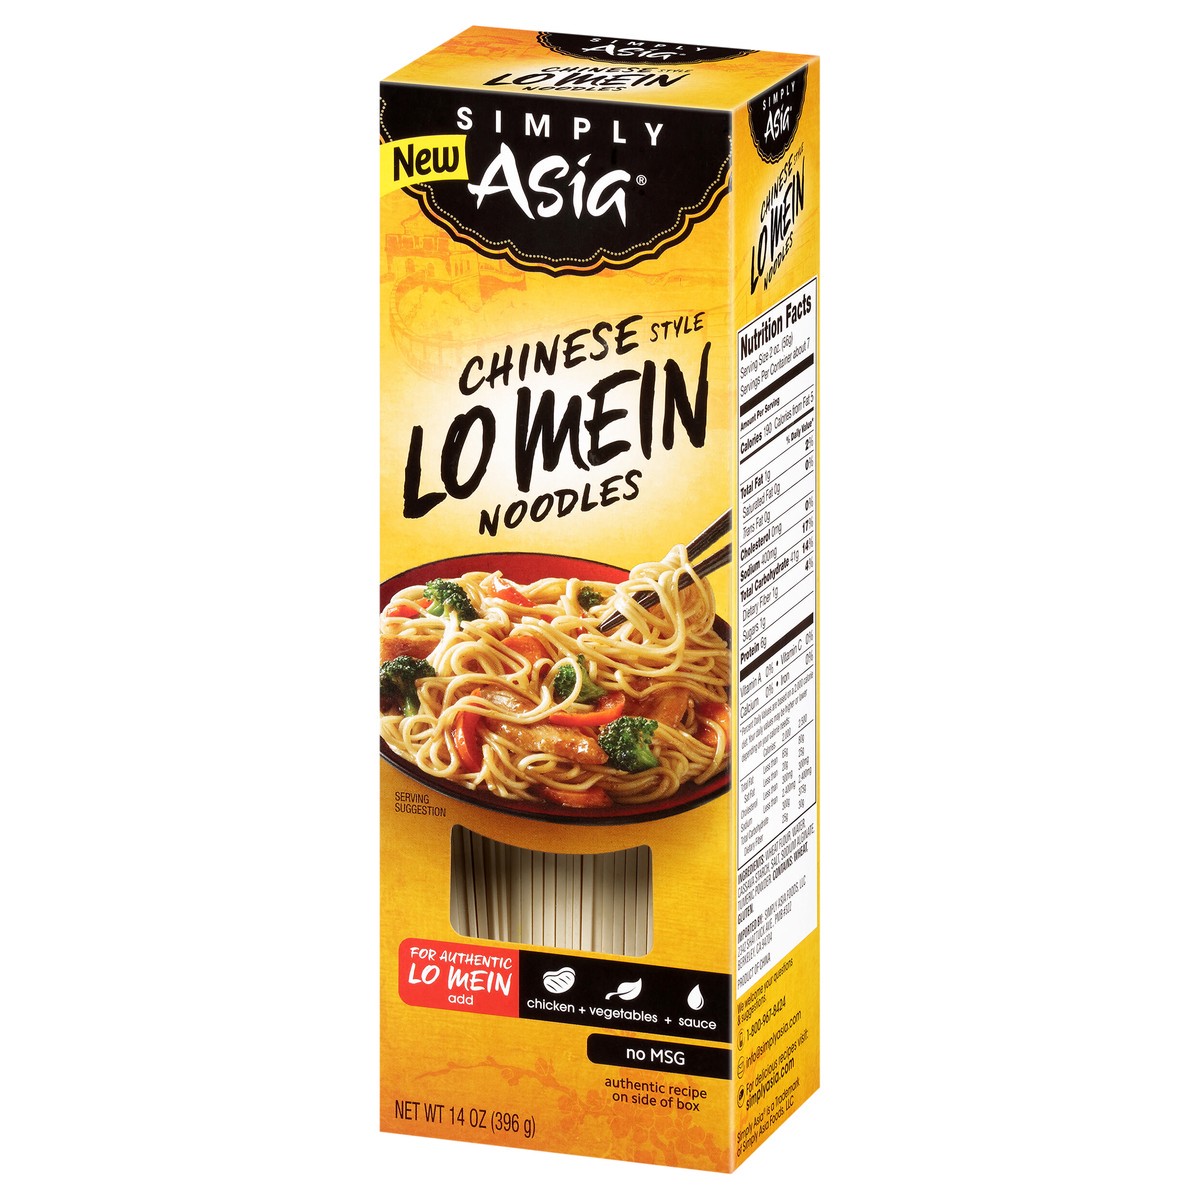 slide 4 of 9, Simply Asia Chinese Style Lo Mein Noodles, 14 oz